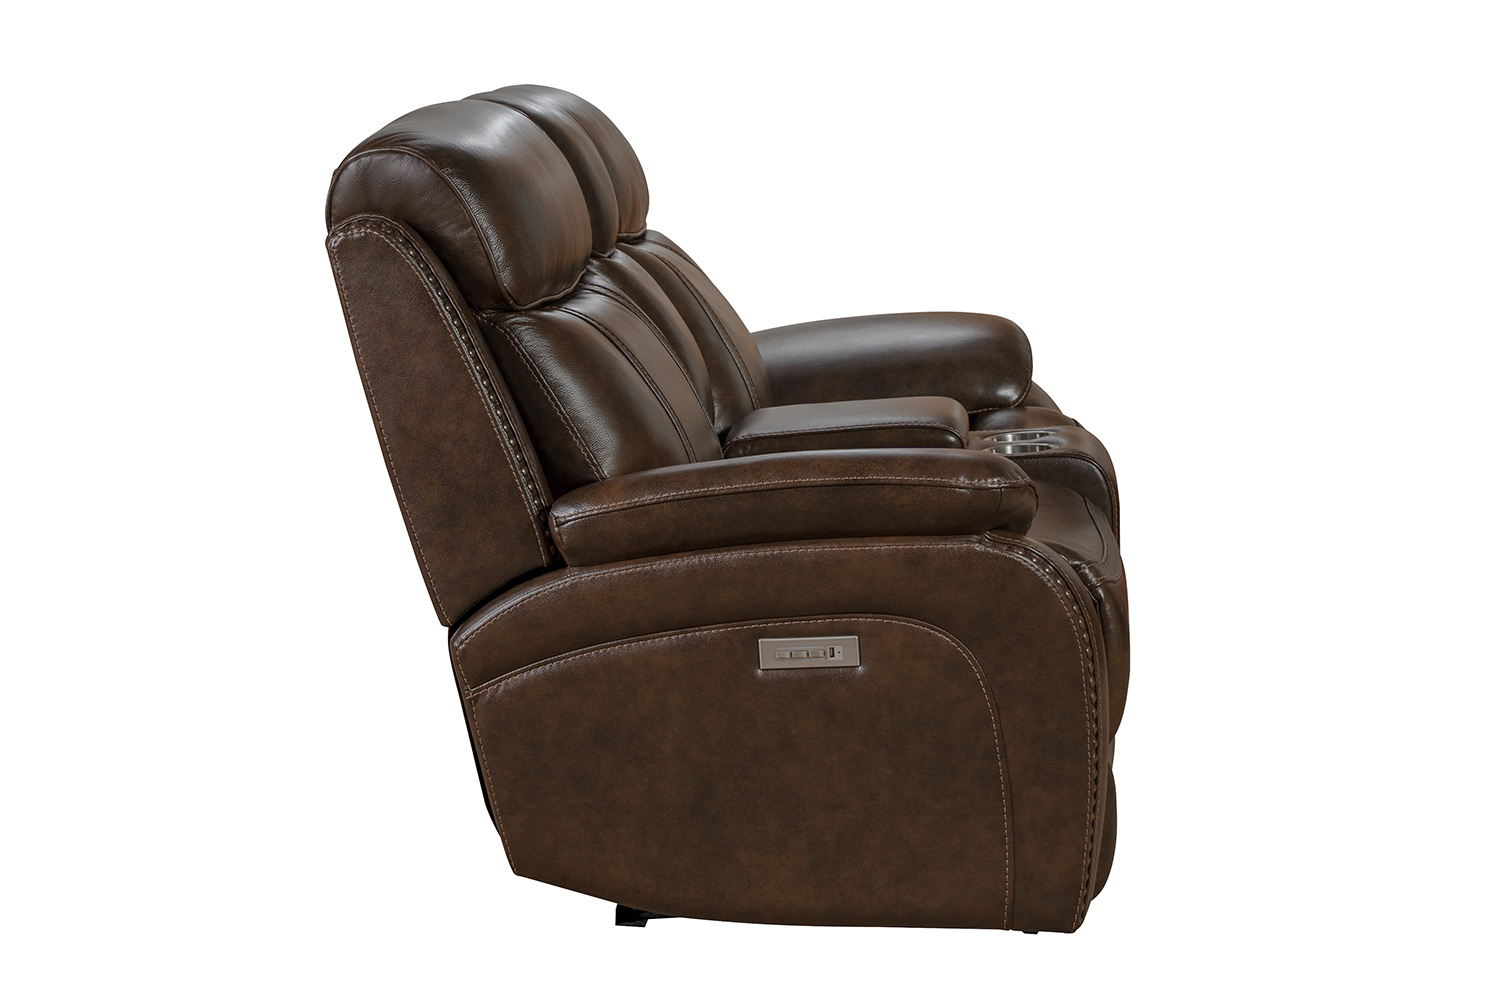 Barcalounger Sandover Power Reclining Console Loveseat with Power Head Rests and Lumbar - Tri-Tone Chocolate/Leather match